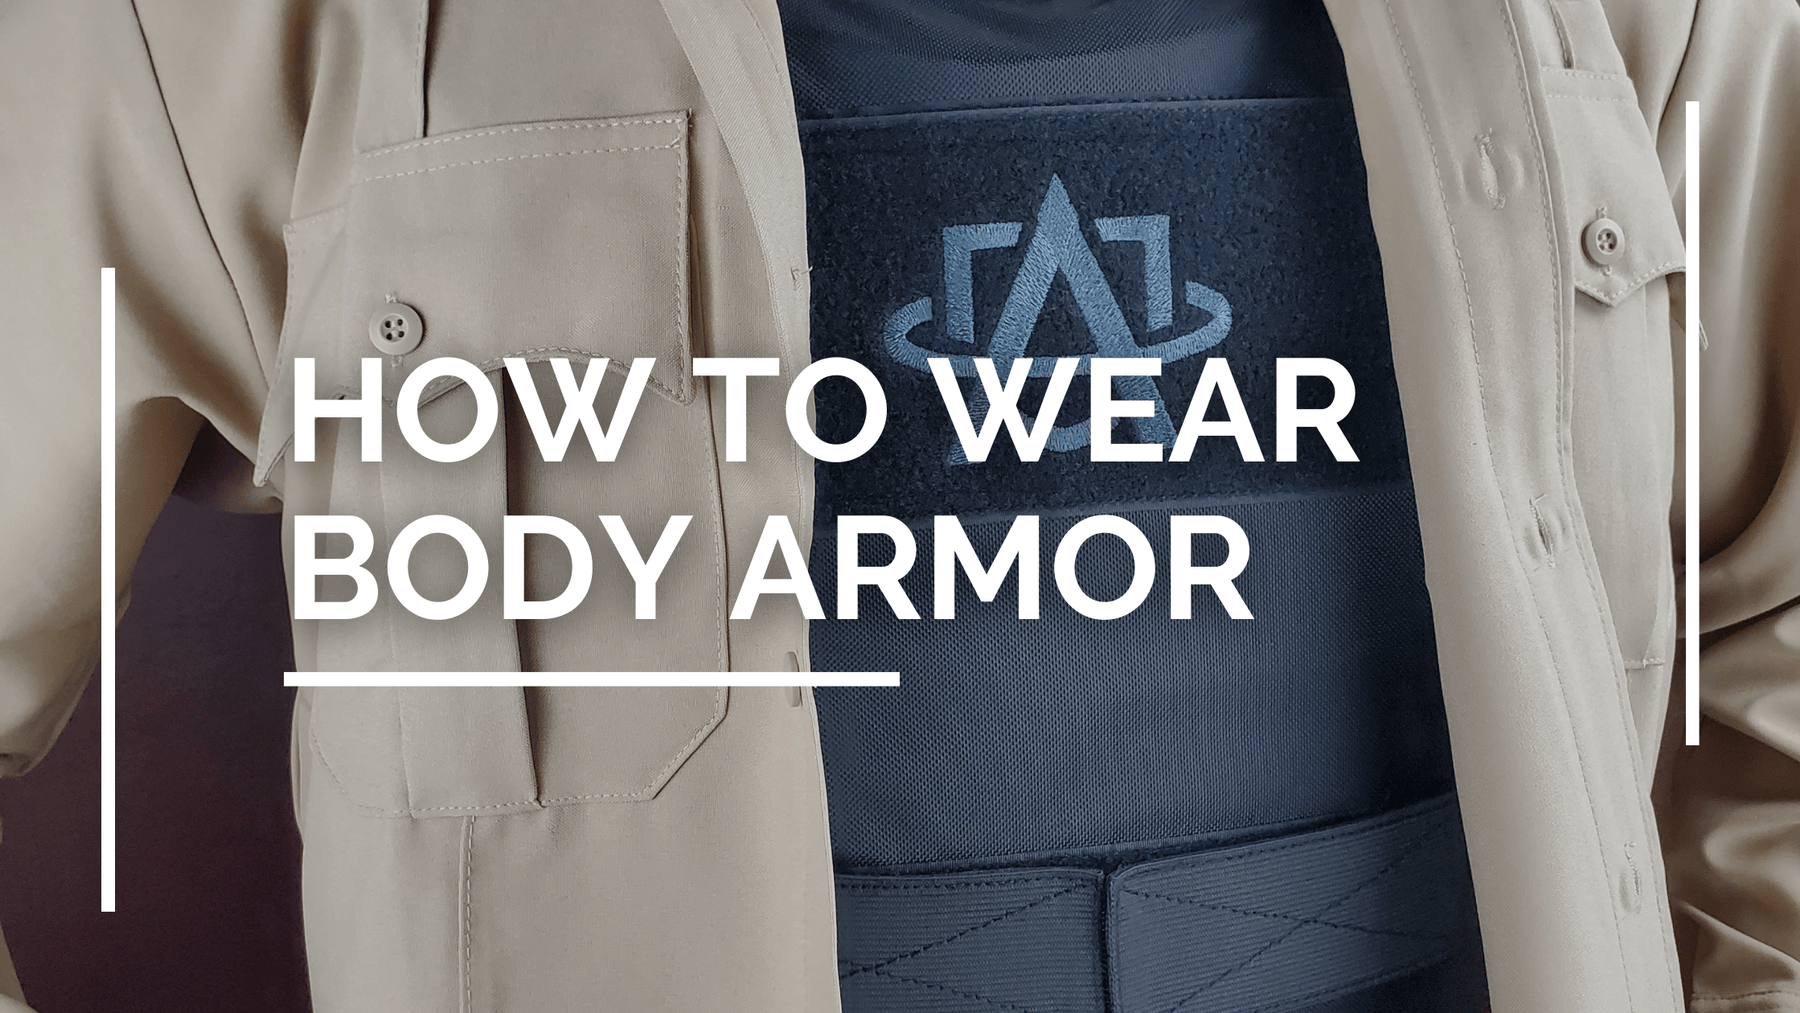 How to Wear Body Armor - Atomic Defense